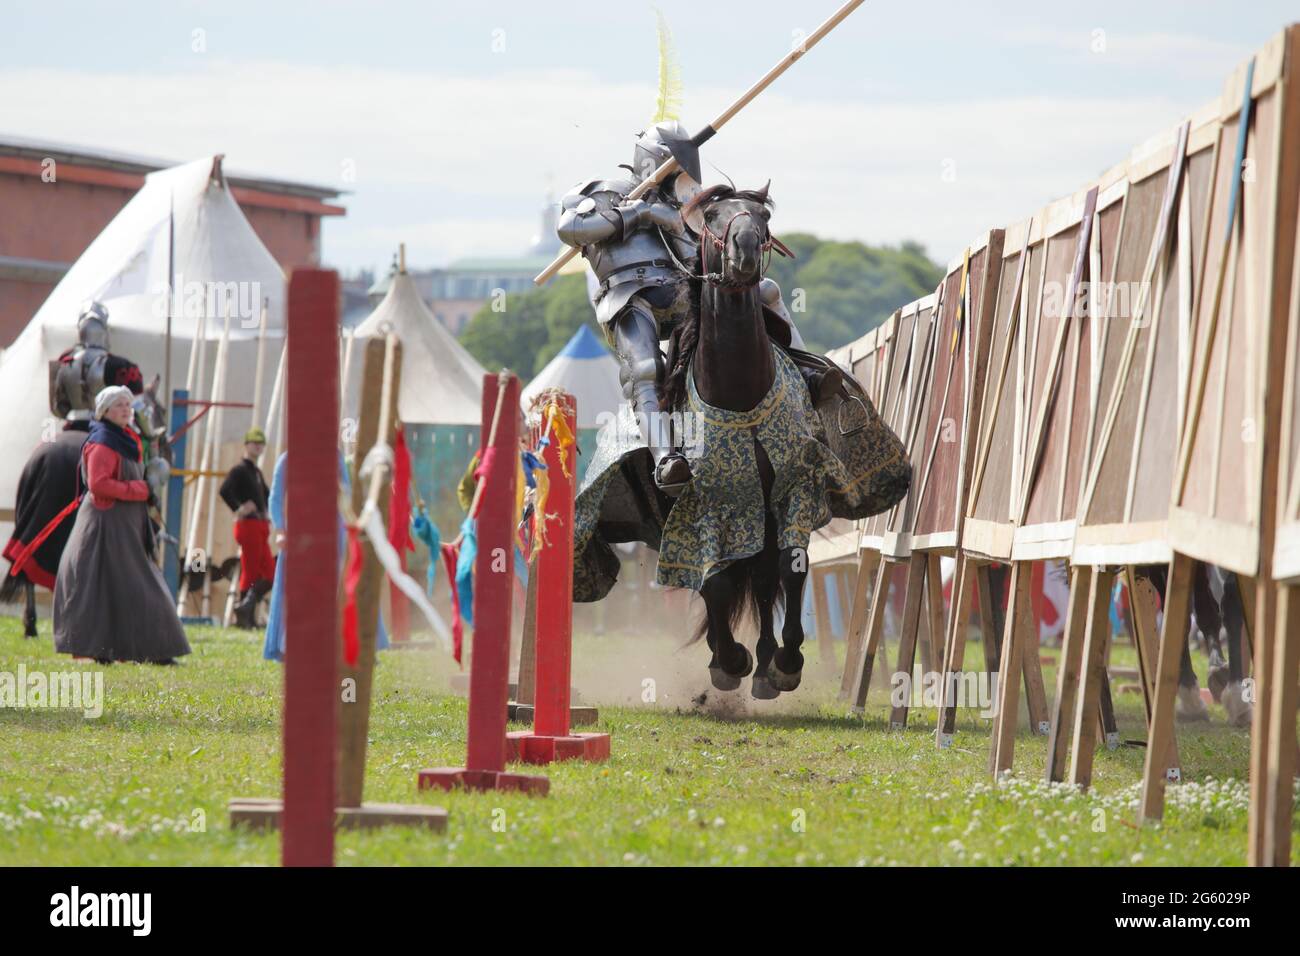 St. Petersburg, Russia - July 8, 2017: Armored knights on horses participating in the jousting tournament during the military history project Battle on Neva Stock Photo